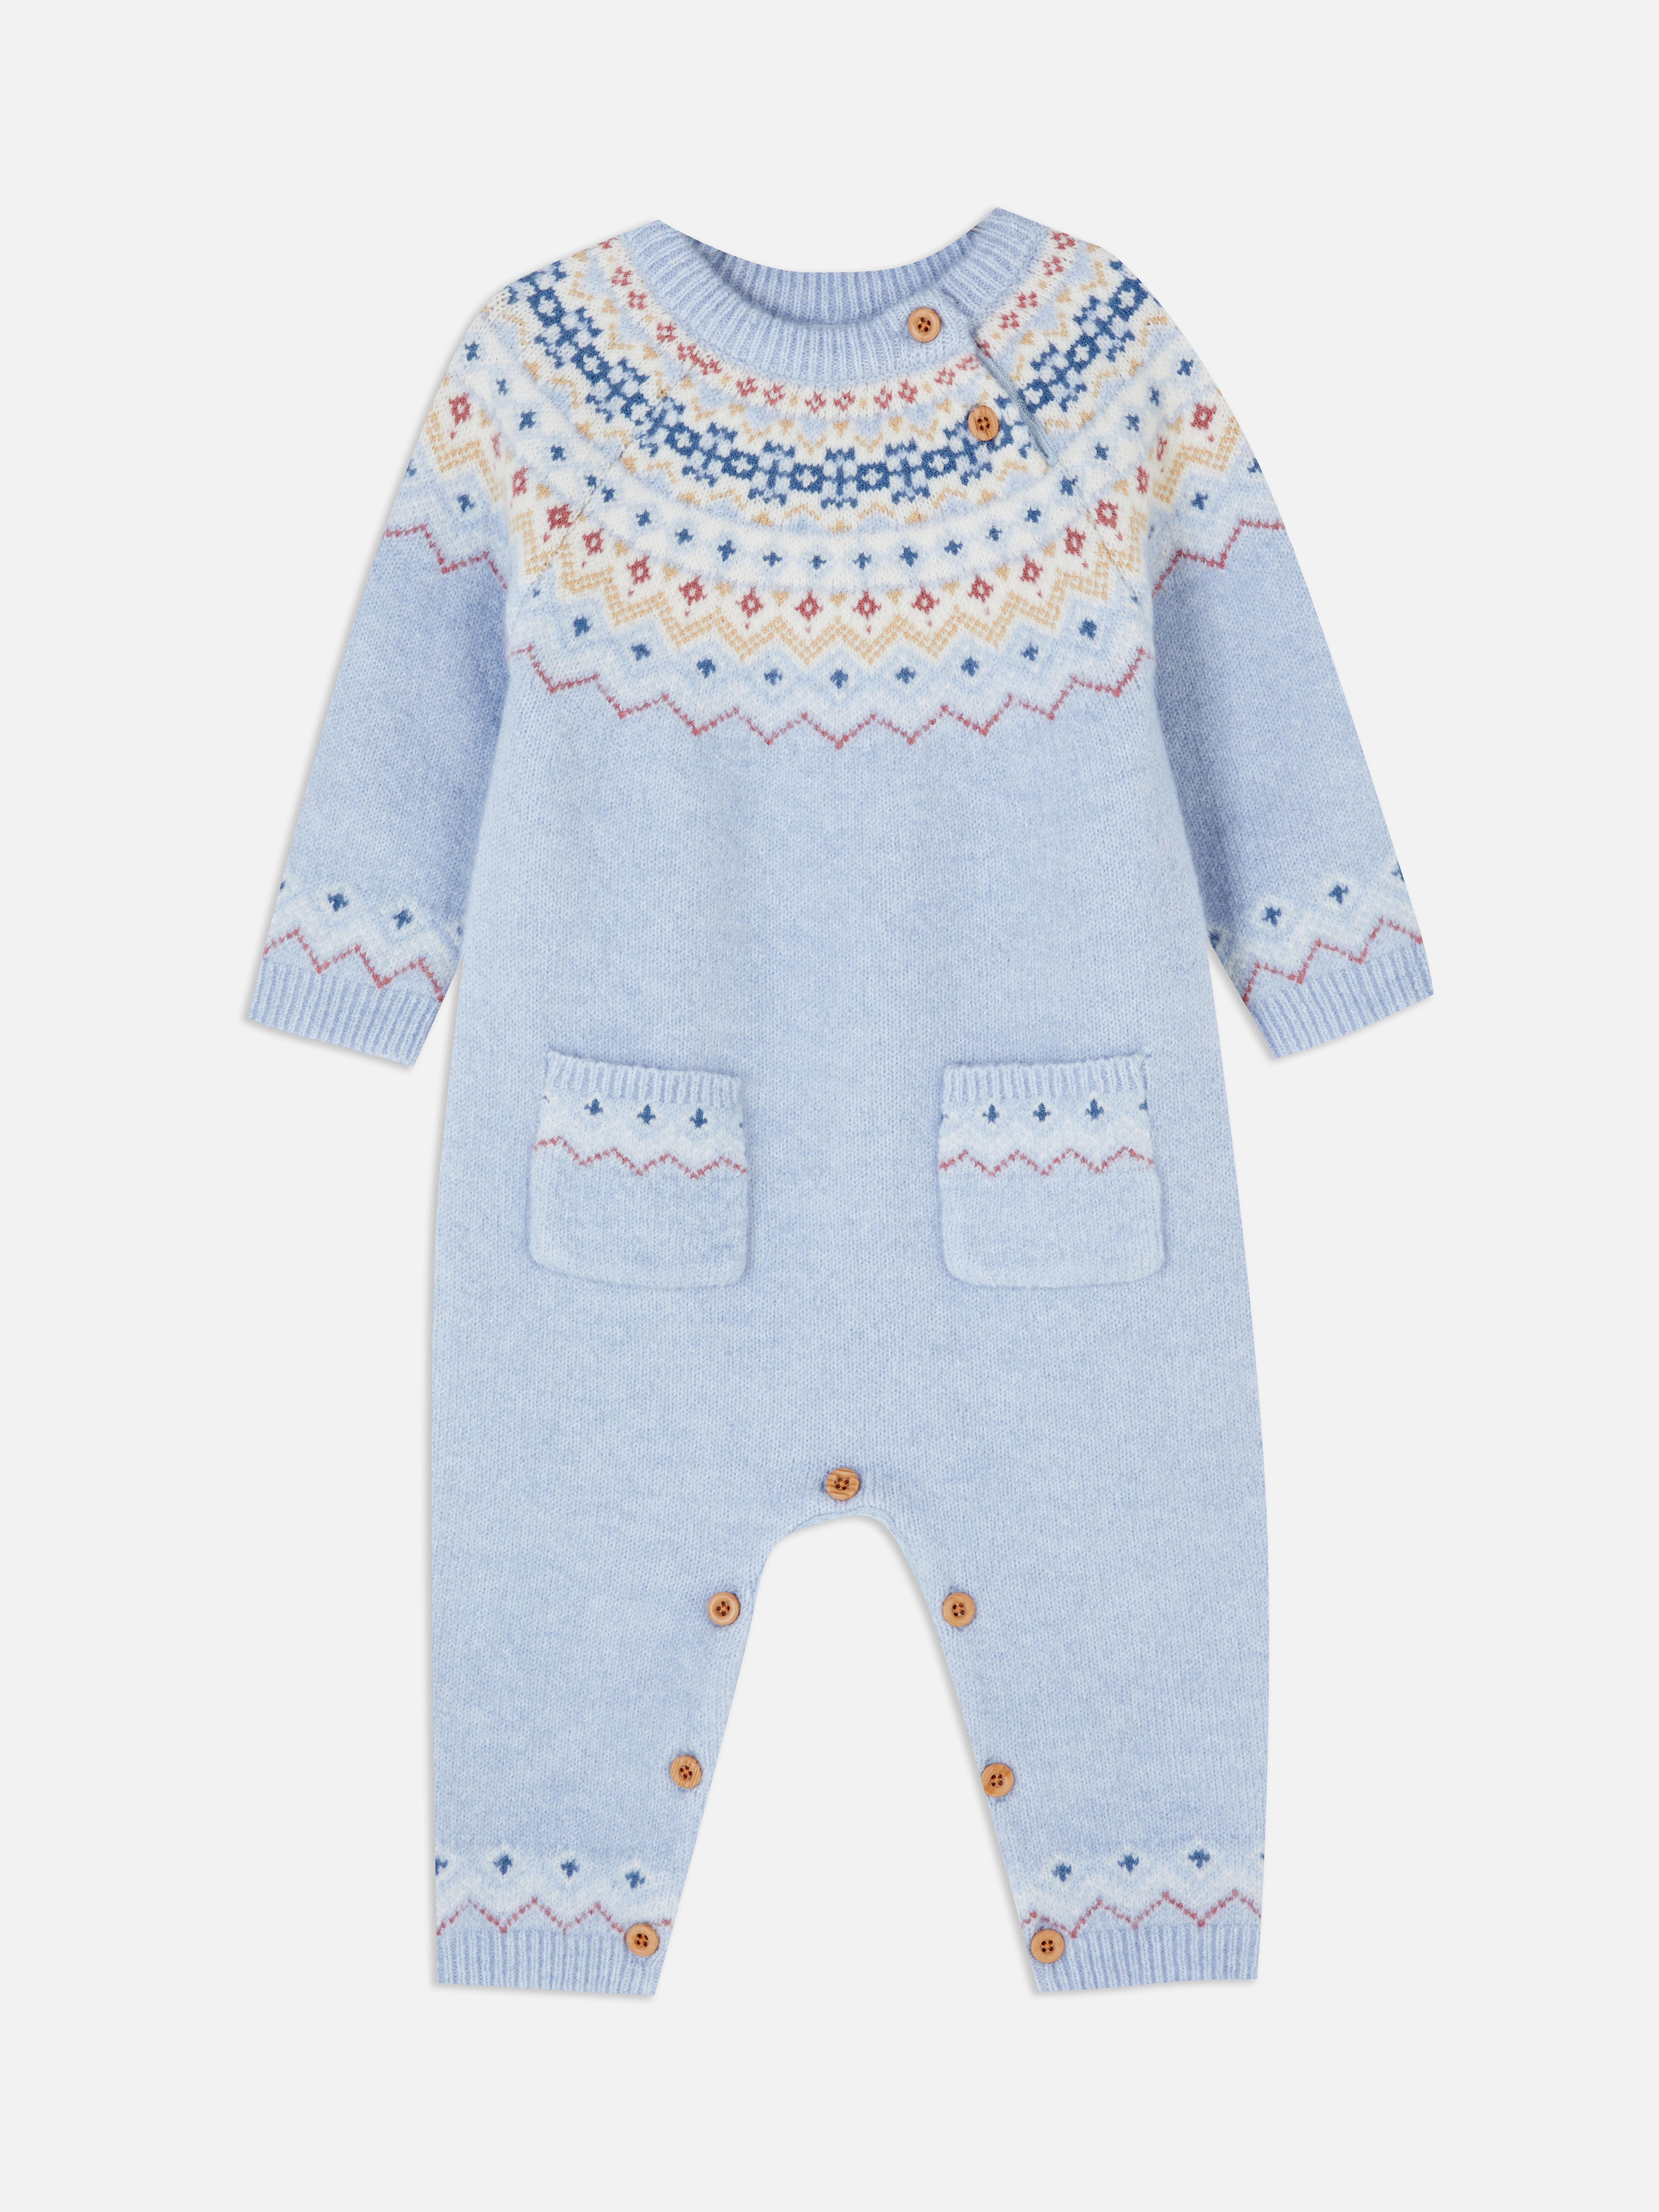 Stacey Solomon Fair Isle Knitted Jumpsuit